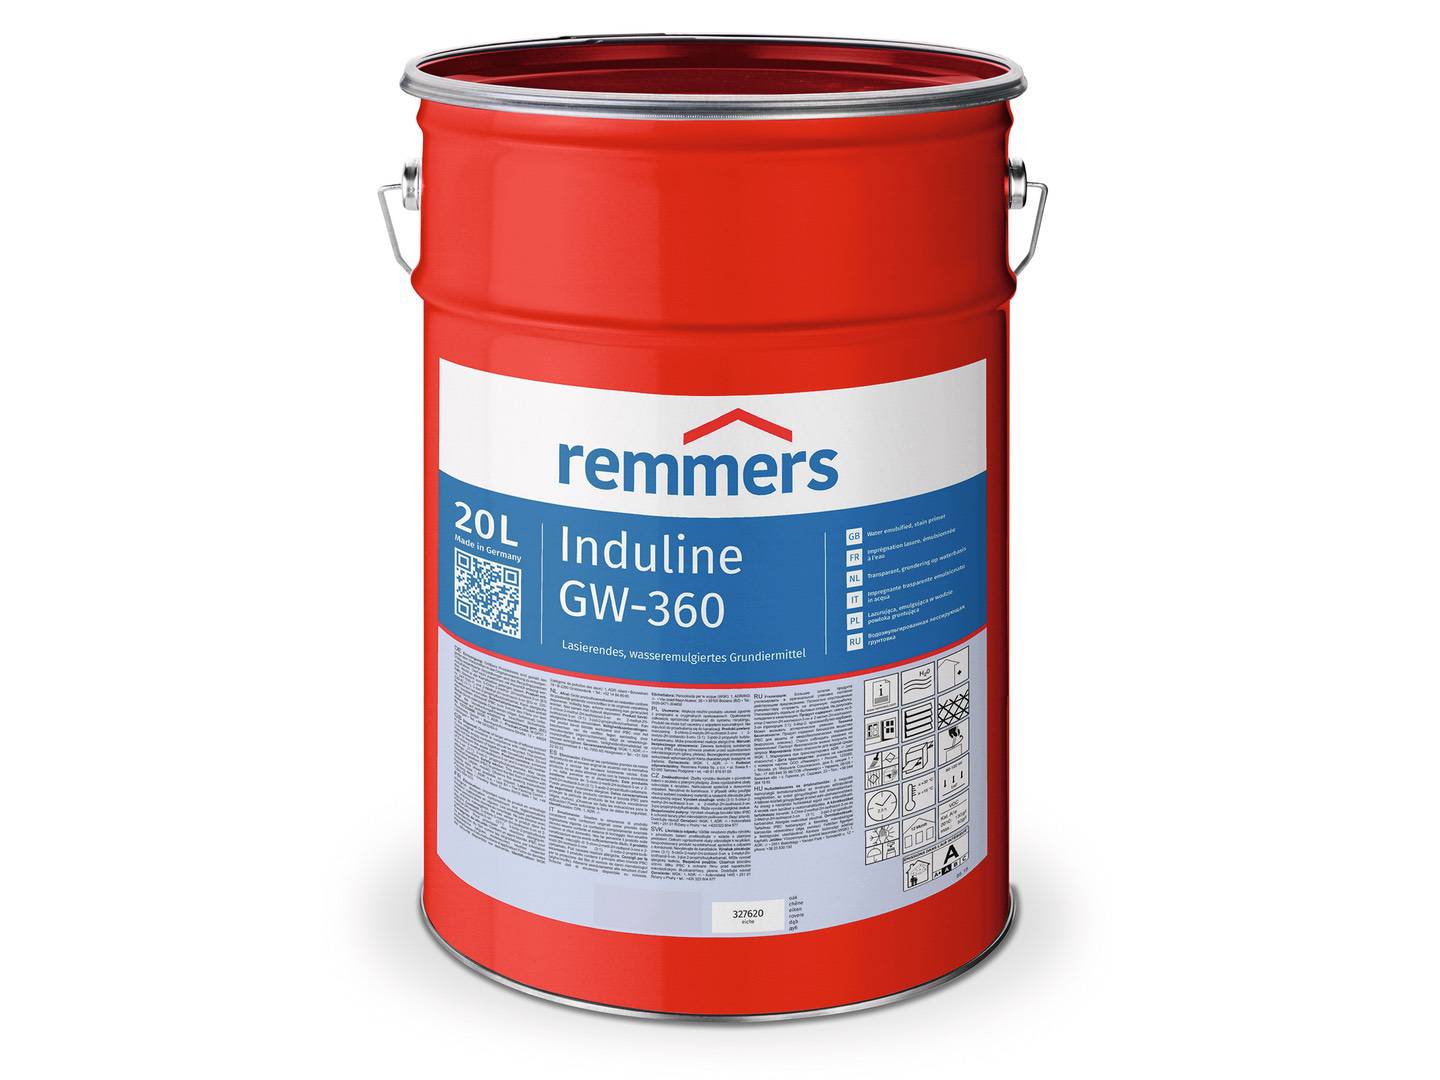 REMMERS Induline GW-360 afromosia (RC-450) 20 l